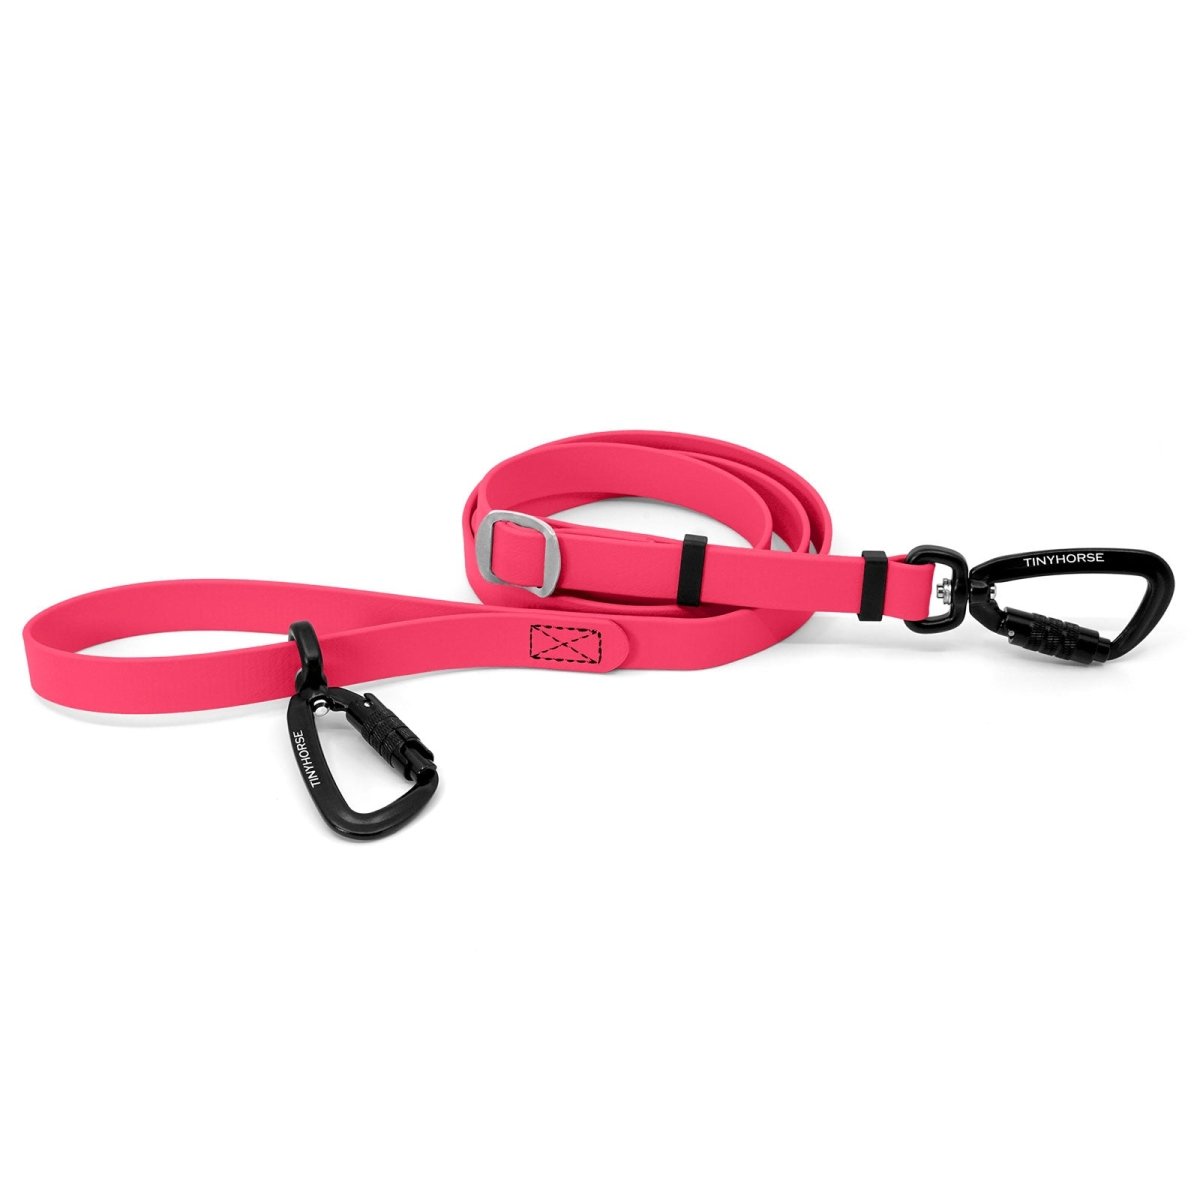 An adjustable neon pink-coloured Lead-All Pro Extra made of BioThane with 2 auto-locking carabiners